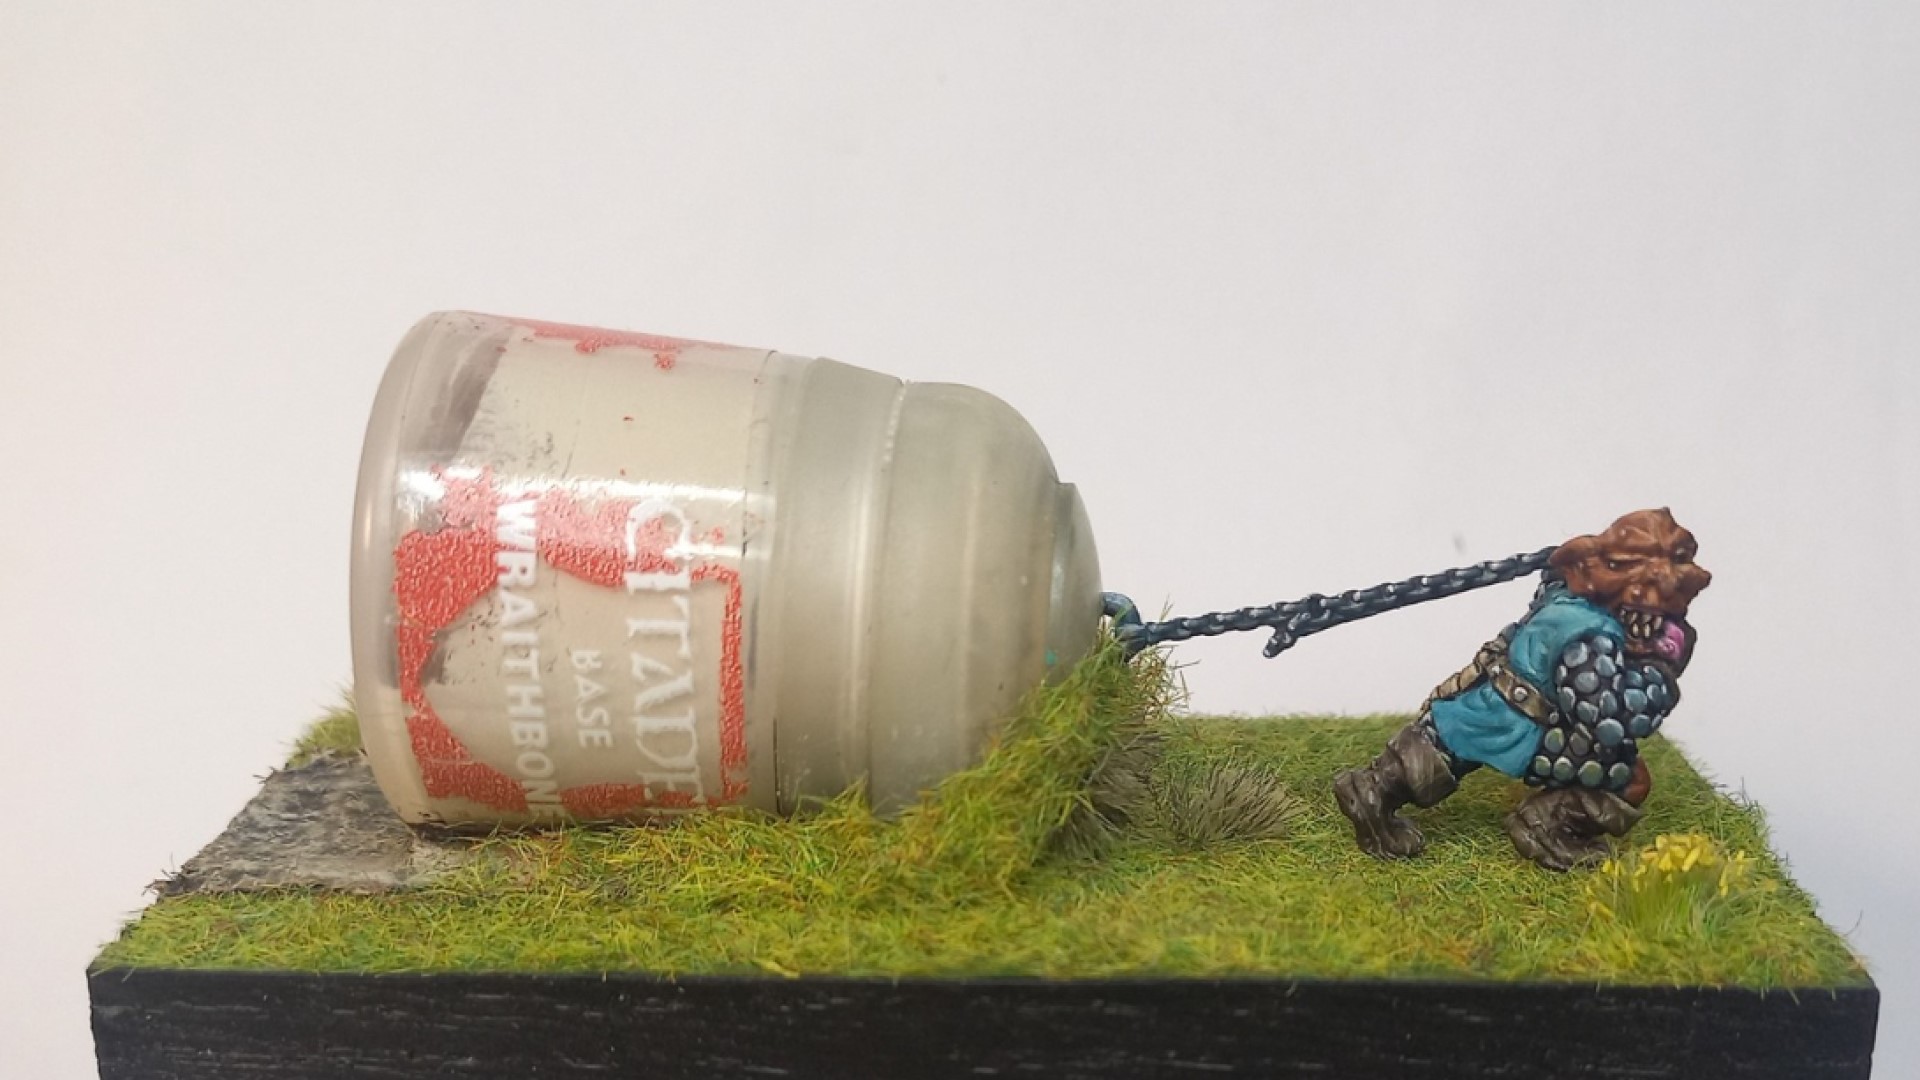 The Warhammer paint pot challenge returns for round two